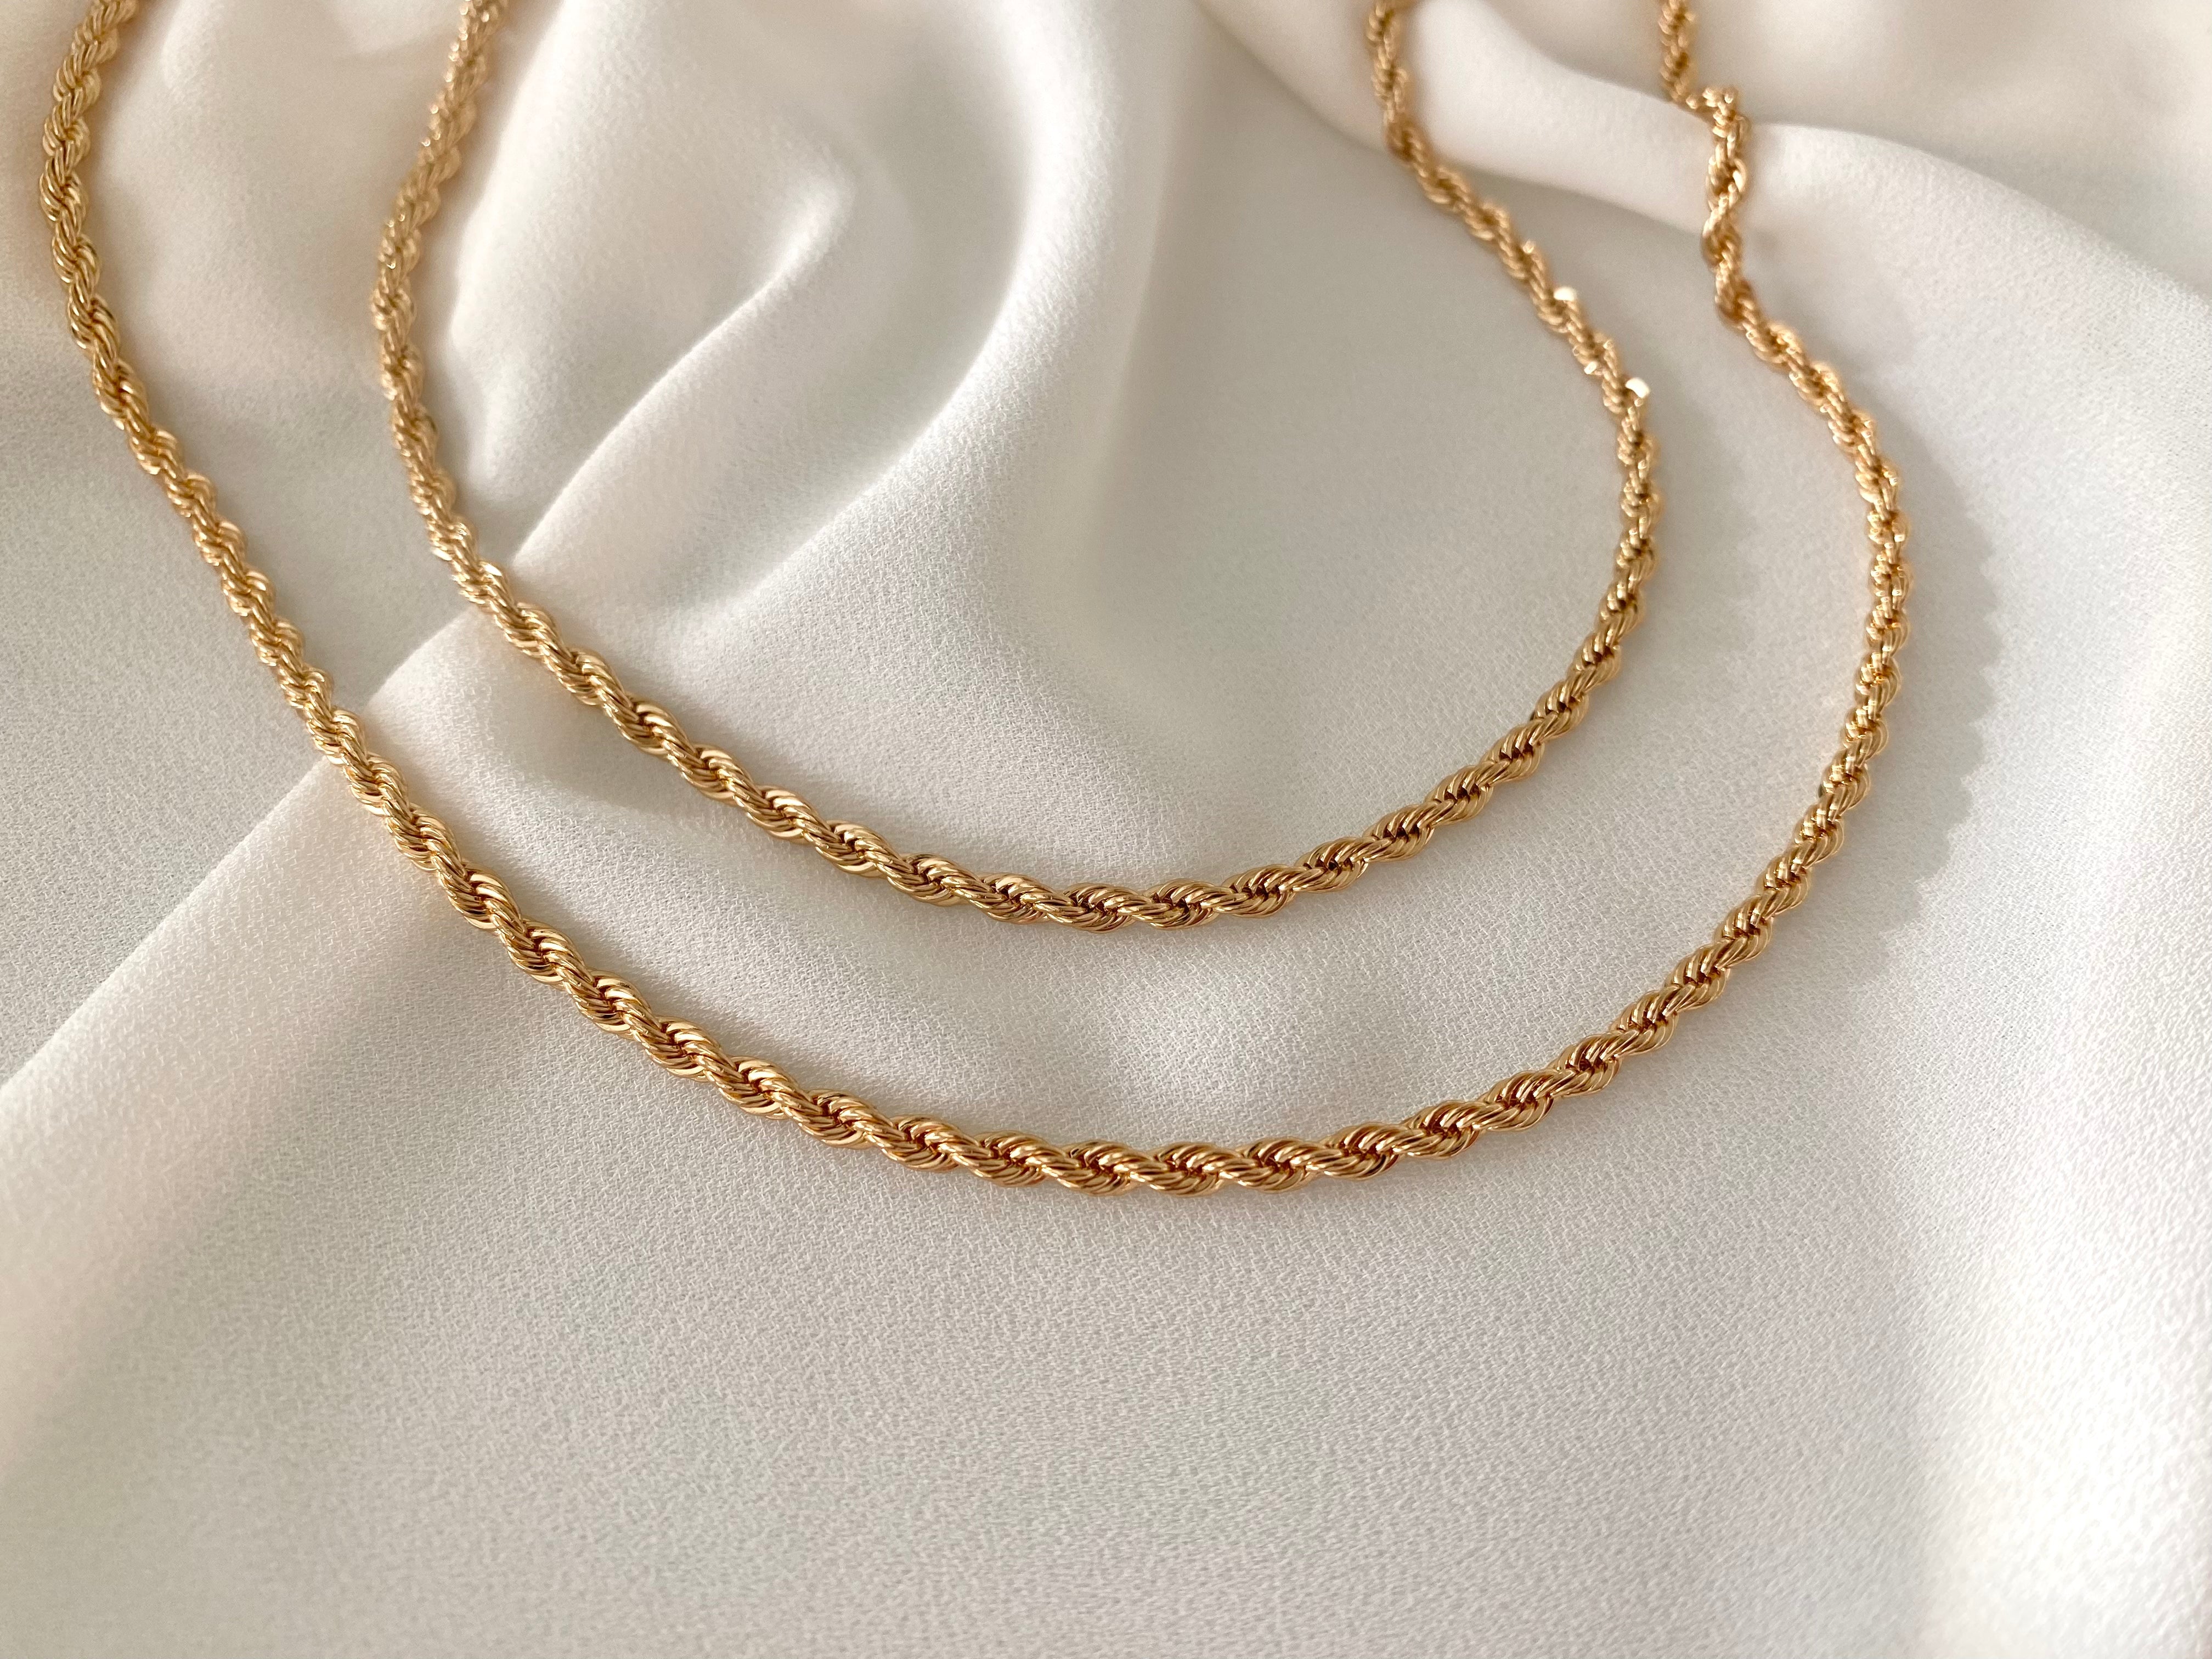 Gold Filled Rope Chain Necklace Thick Twist Chain Layering Chains for Women Minimalist Gold Necklace Christmas Gift Simple Everyday Chains